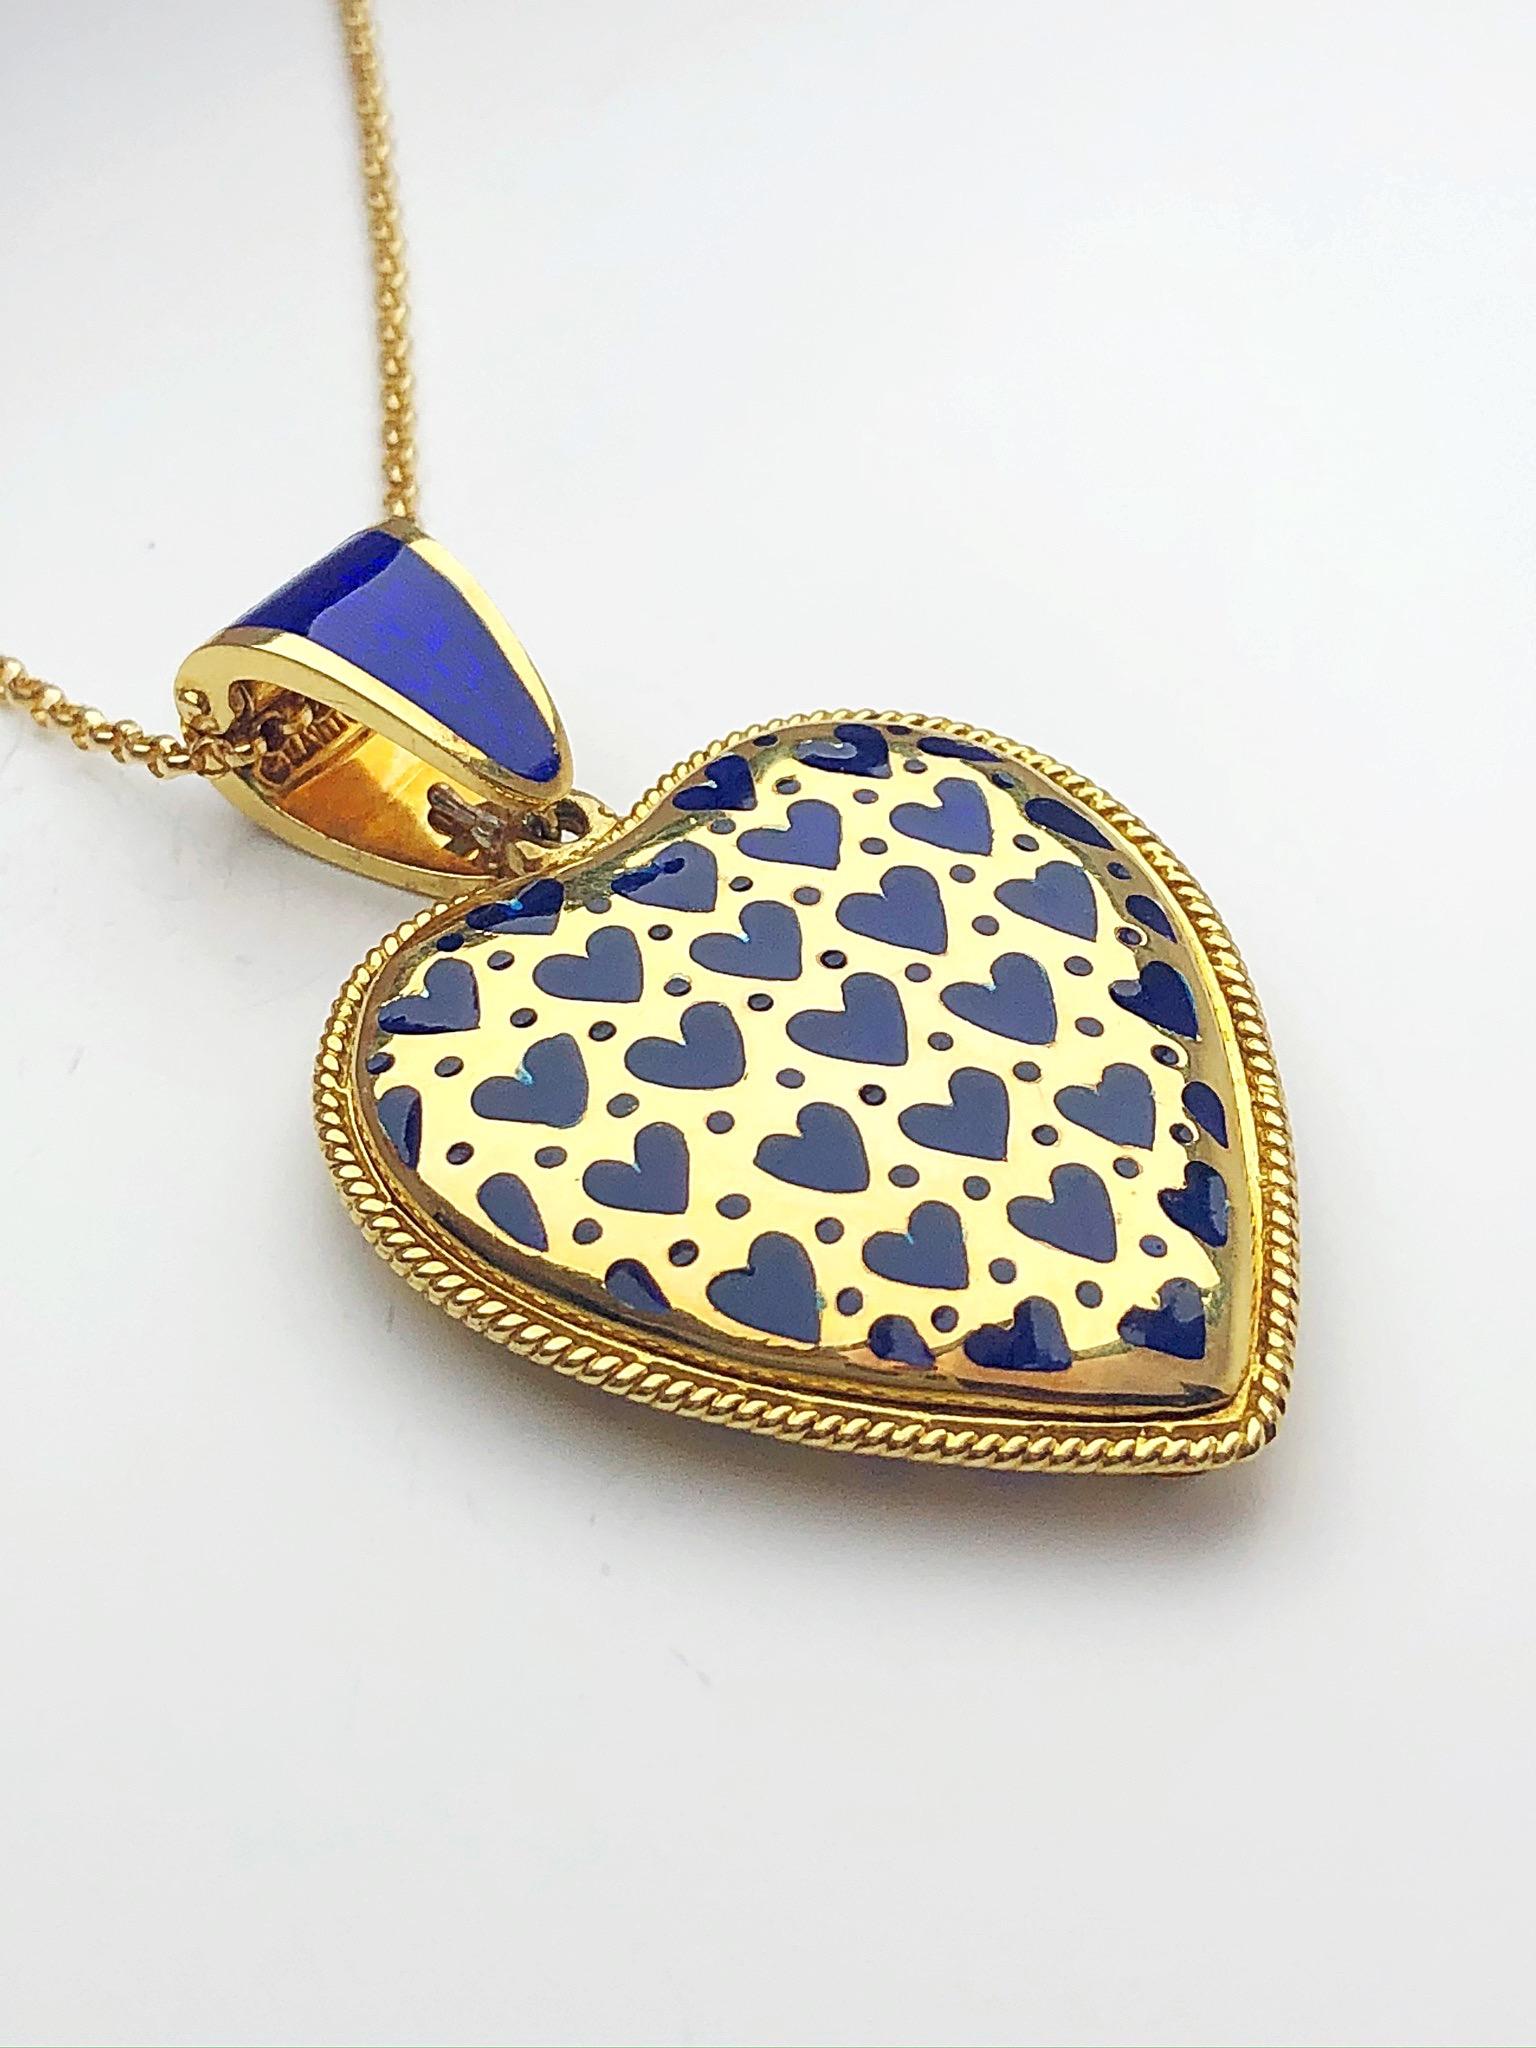 This beautiful heart shaped pendant is crafted in 18 karat yellow gold. Small blue enamel heart shapes make the pattern on the front of the heart. The back of the heart pendant is beautifully finished with an array of heart cutouts. The pendant has